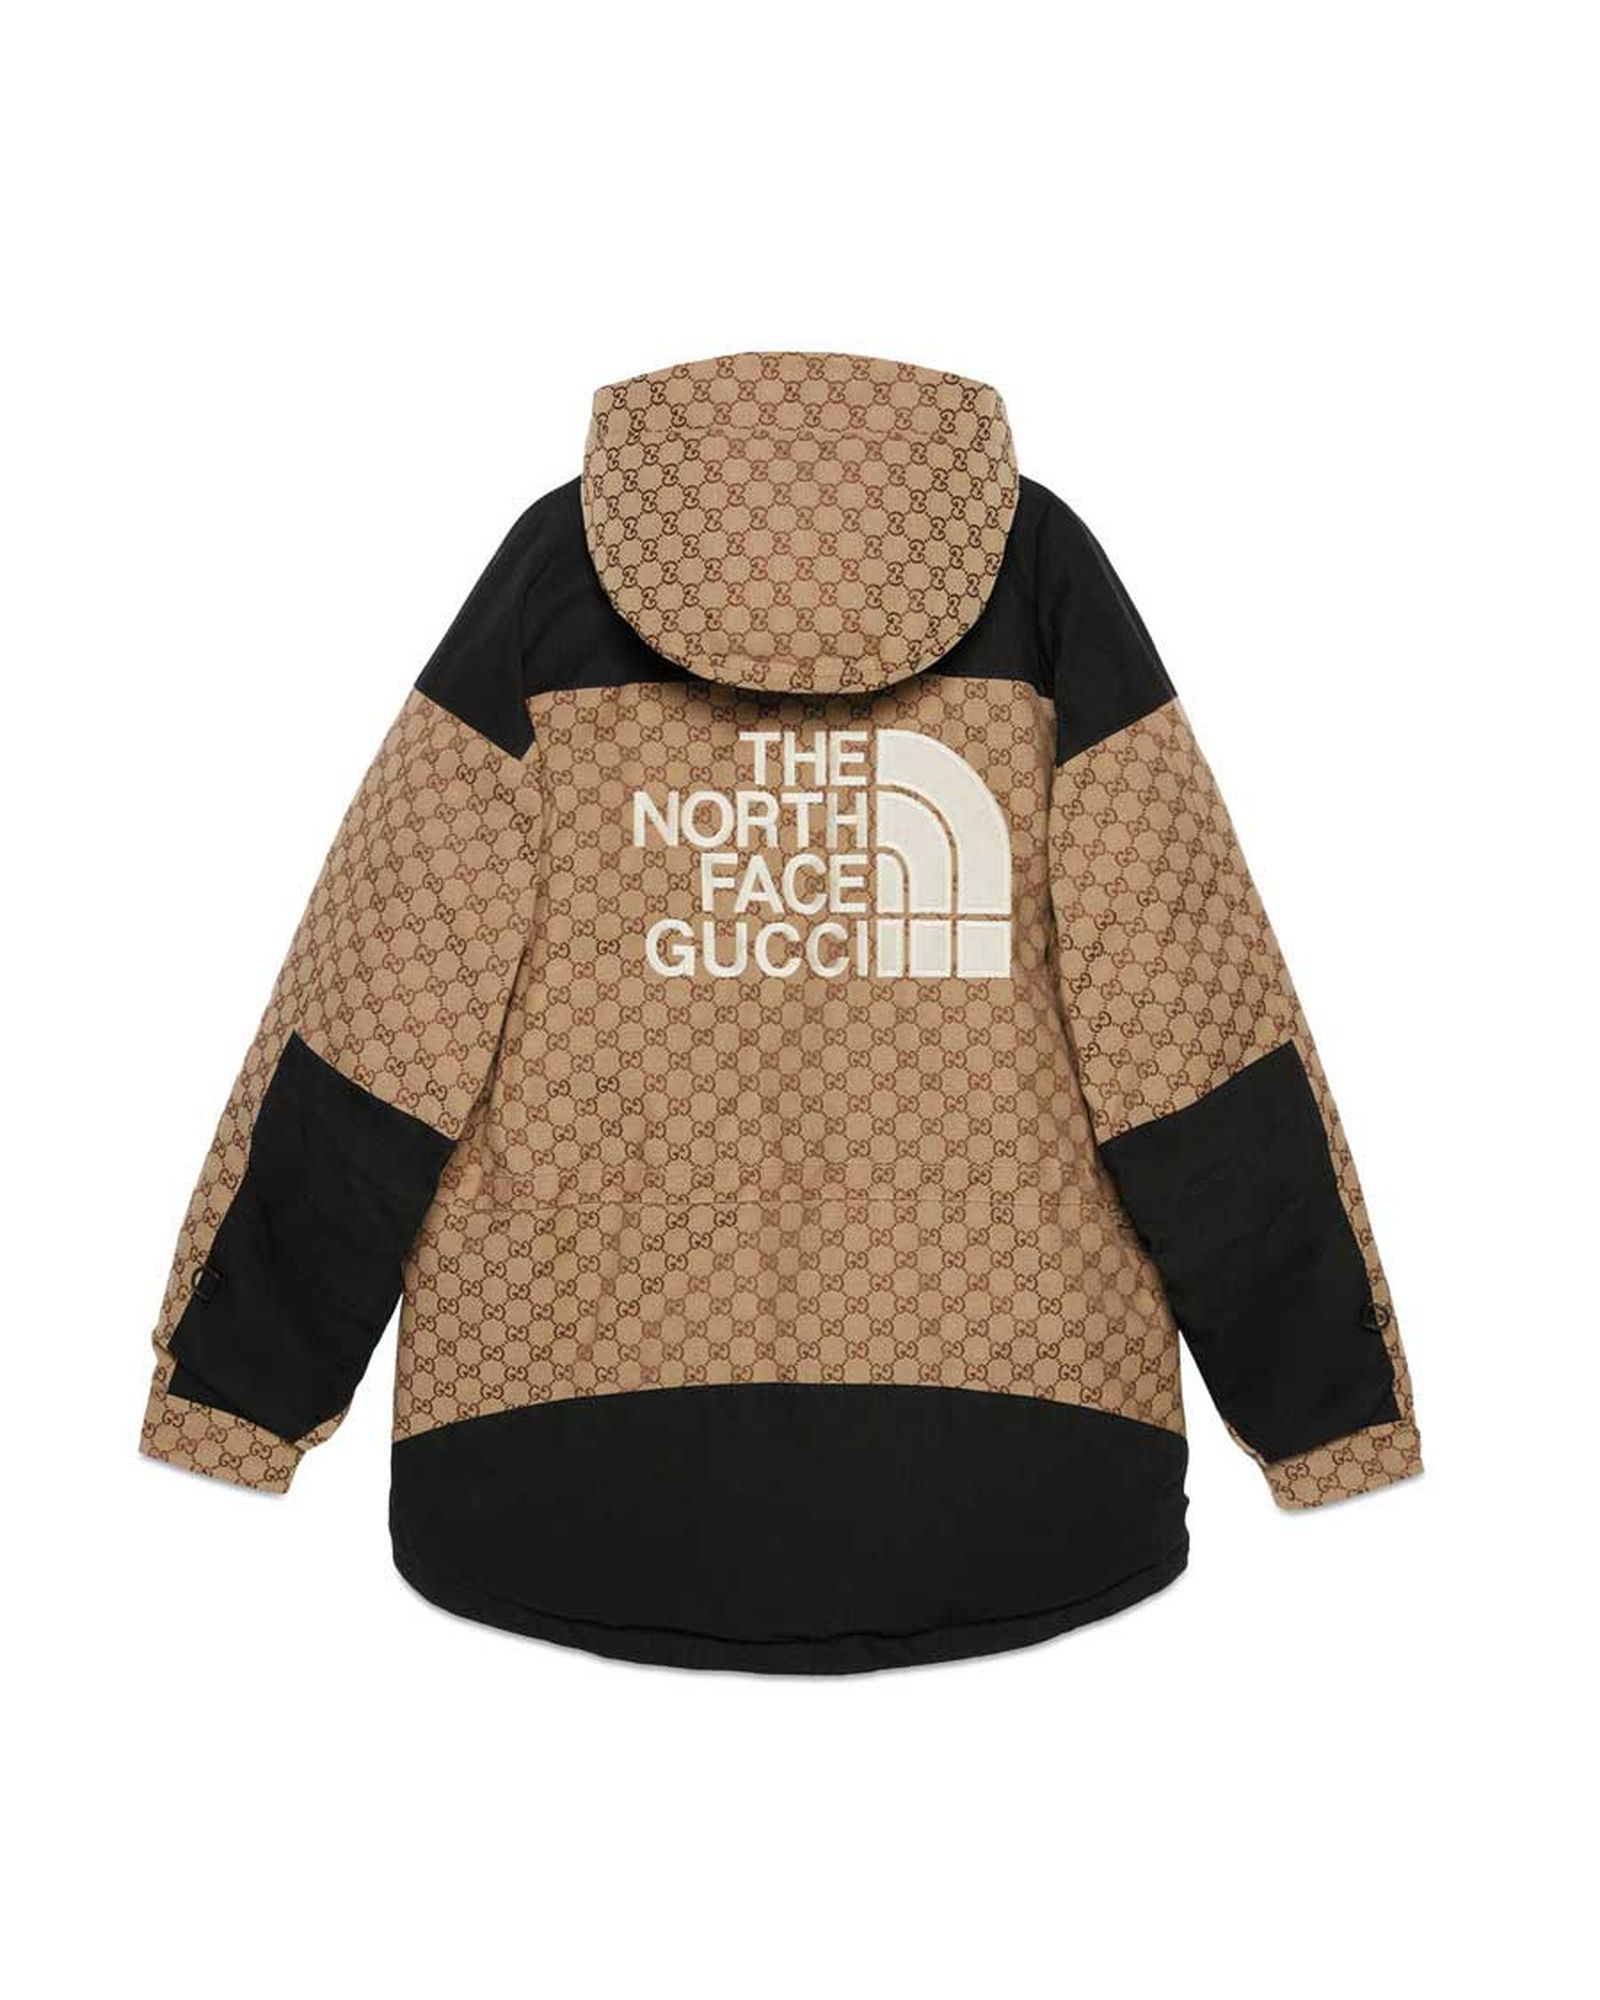 Gucci The North Face Full Fw21 Collaboration Where To Buy